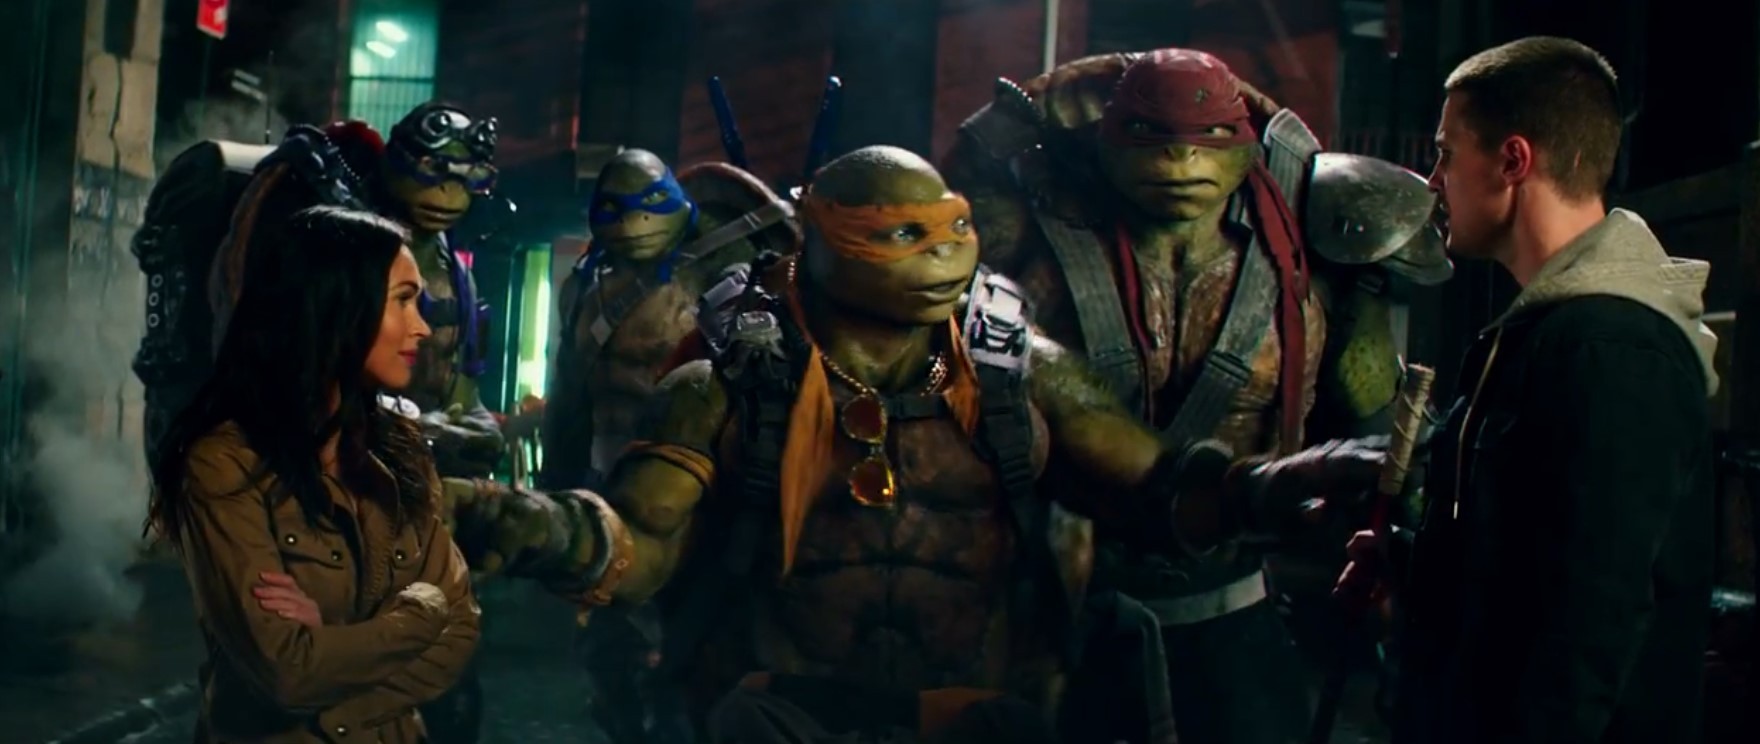 Teenage Mutant Ninja Turtles (2016): Bring it Out of the Shadows, or Dump it in an Alley?